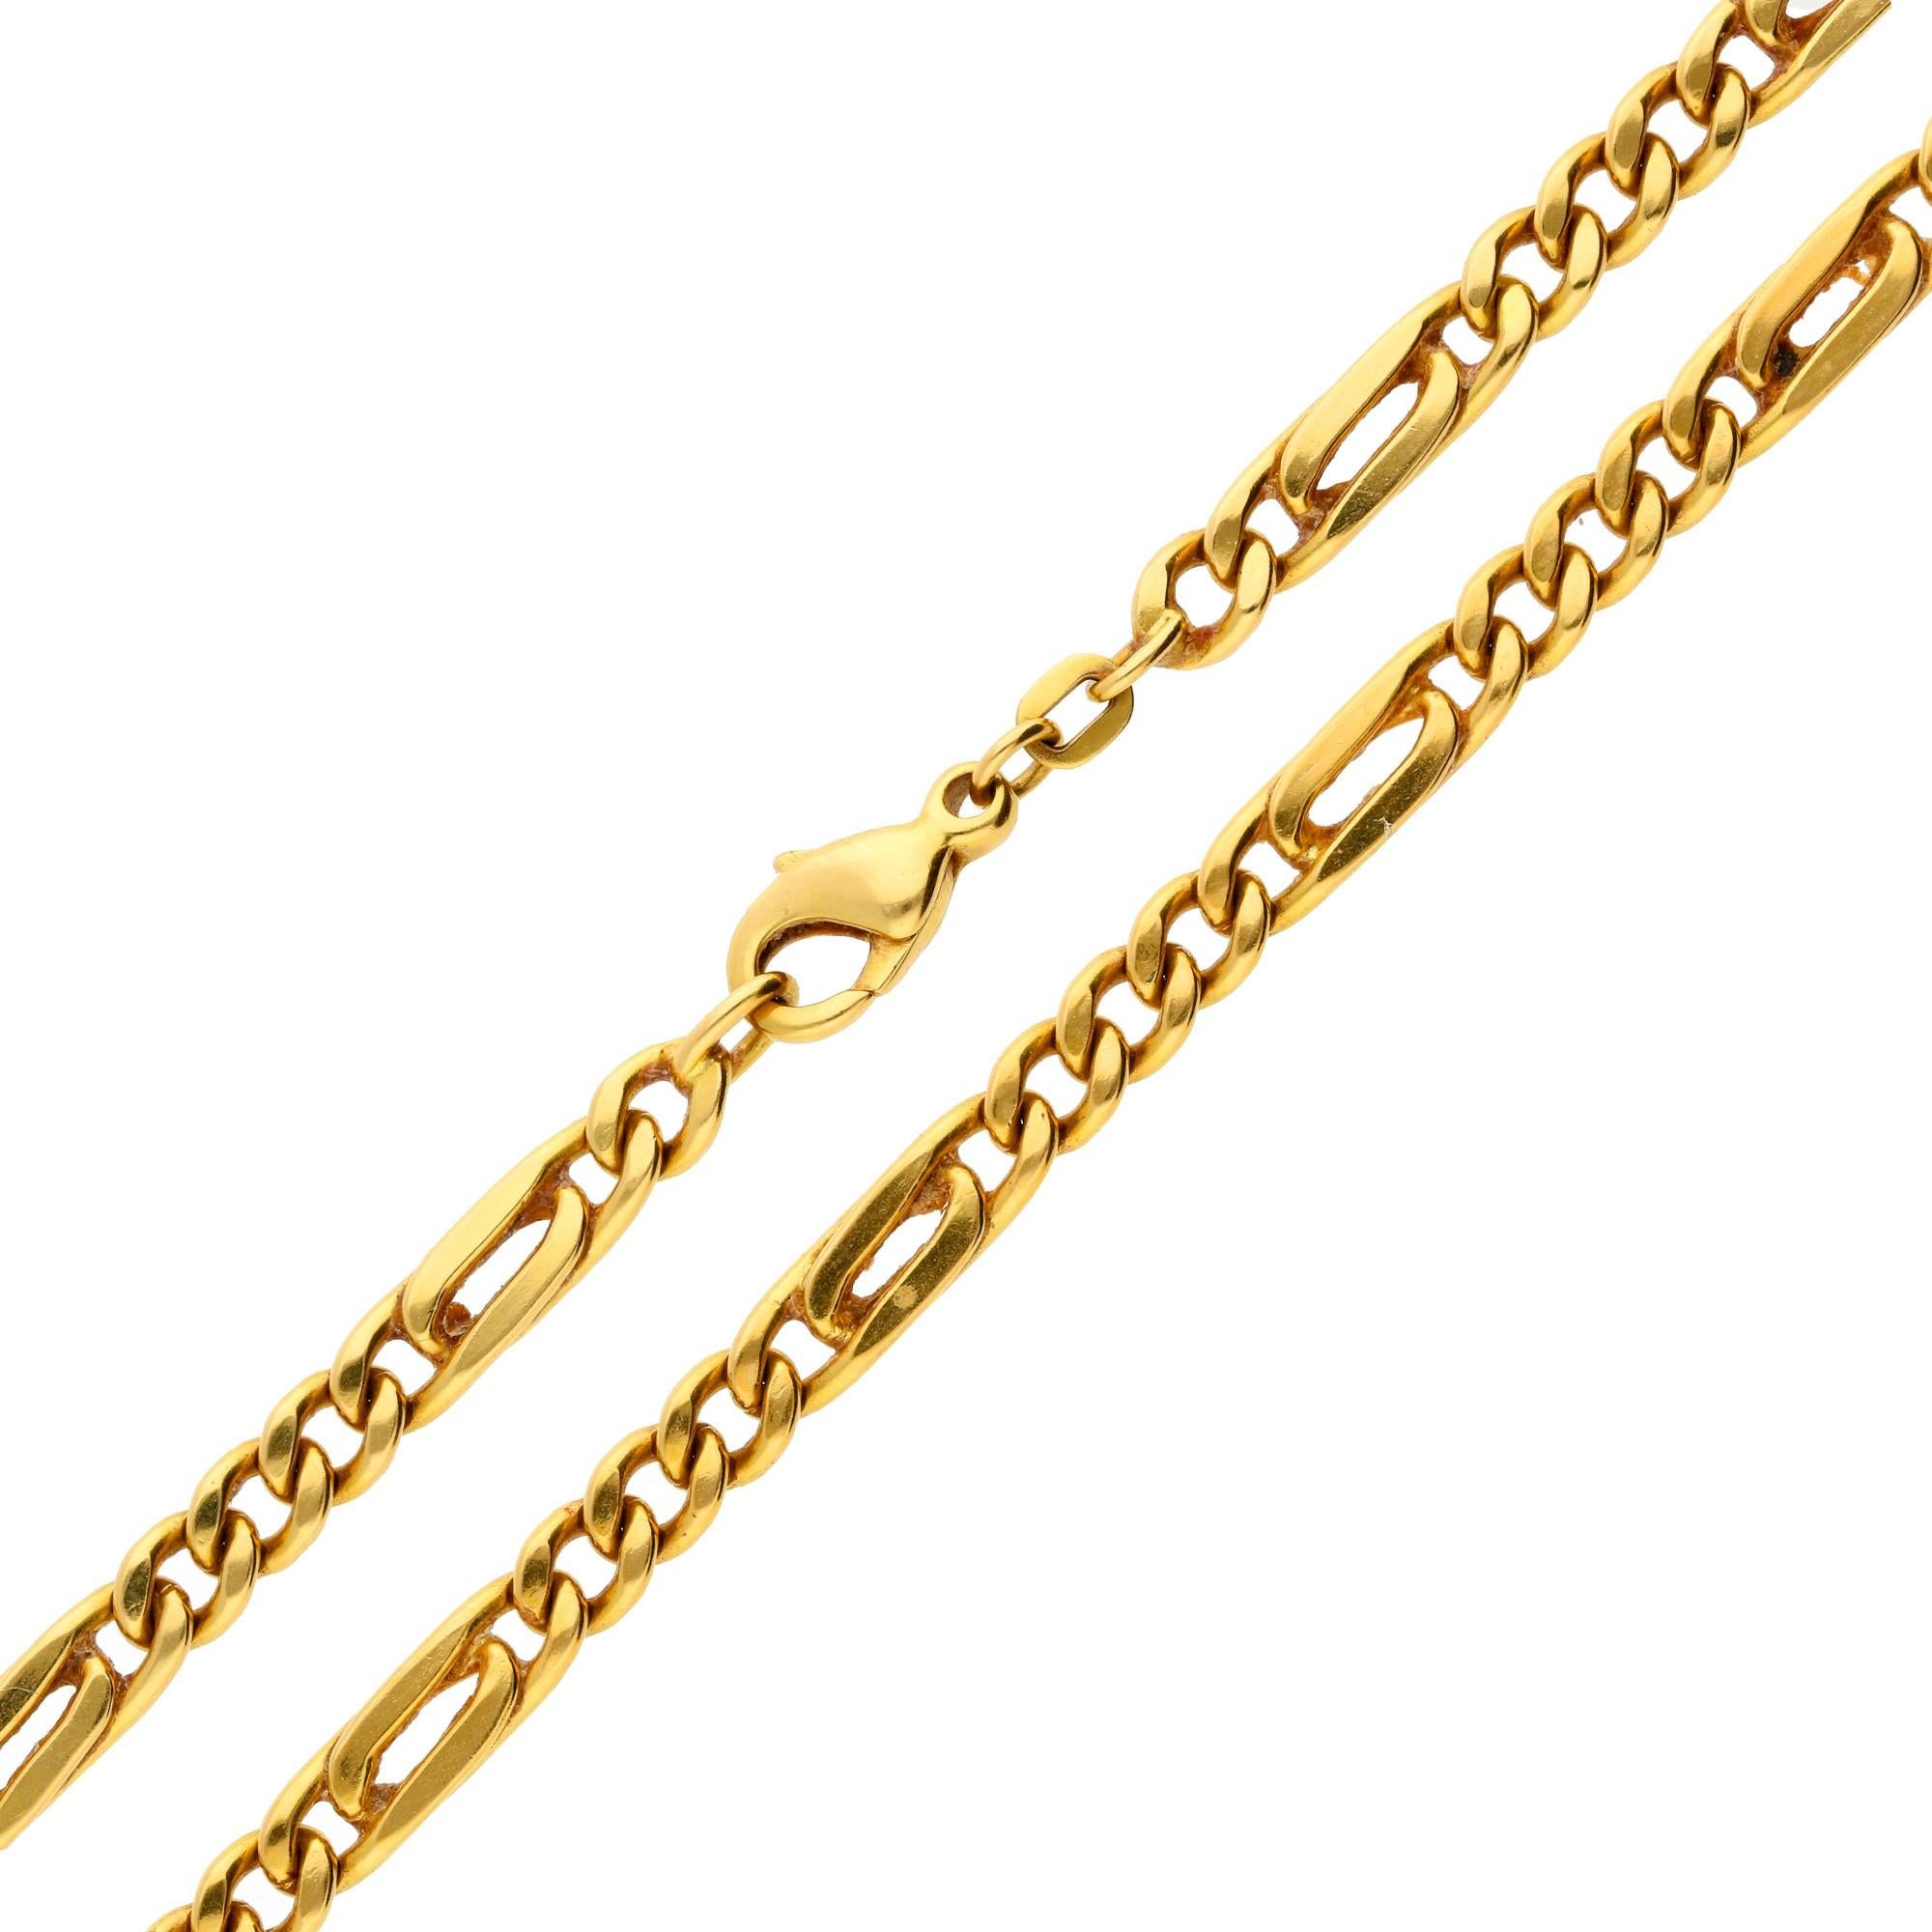 A classic design figaro chain crafted in 18ct gold measuring 4.7mm wide. A sturdy and solid chain measuring 18 inches long, this is the ideal piece to wear alone and every day.

Stamped 18ct. Tested as 18ct Gold.